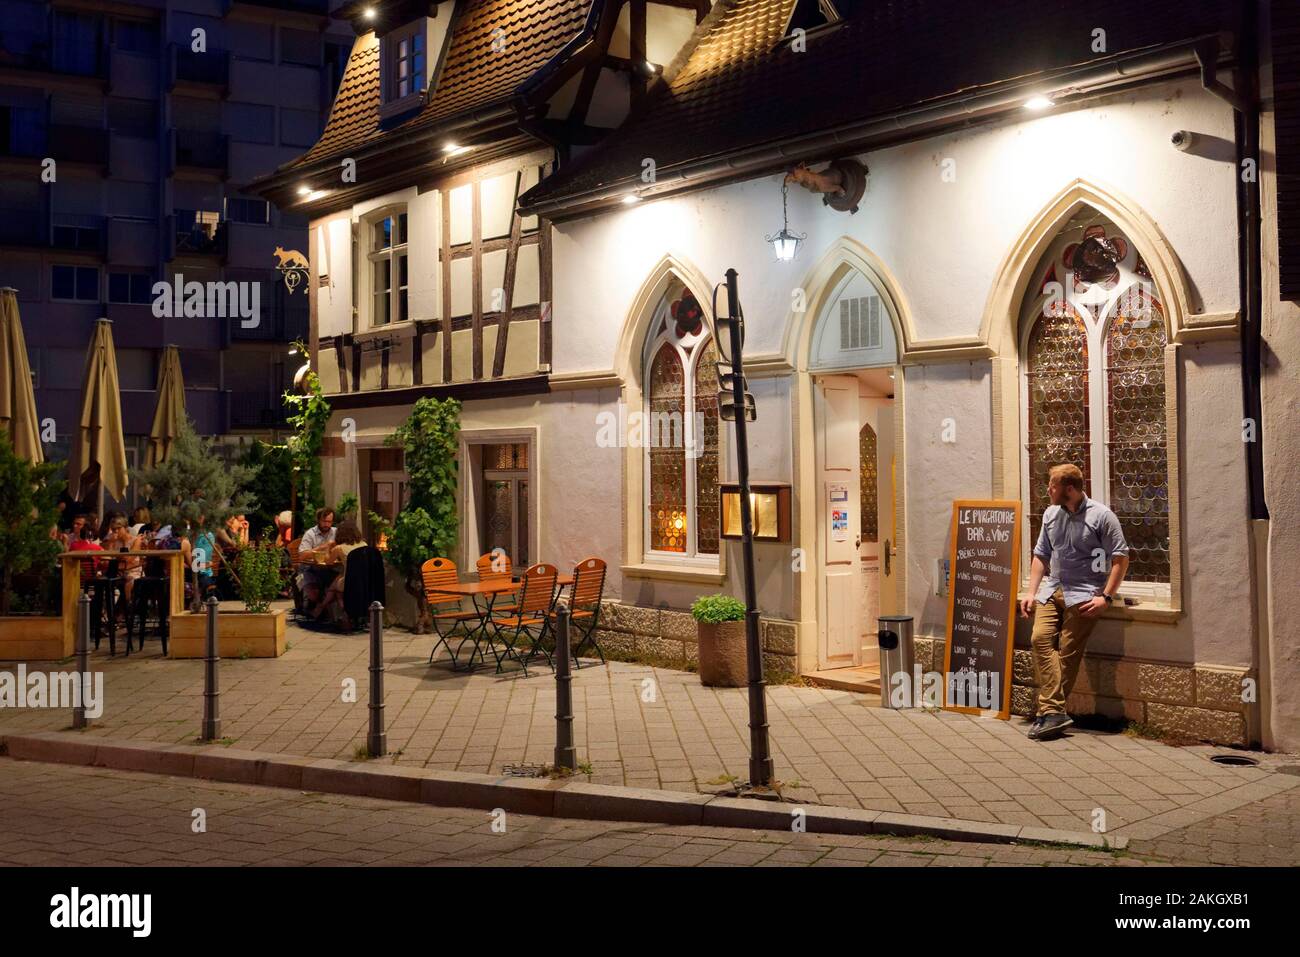 France, Bas Rhin, Strasbourg, old town listed as World Heritage by UNESCO,  Krutenau district, Zurich square, Le Purgatoire wine bar Stock Photo - Alamy